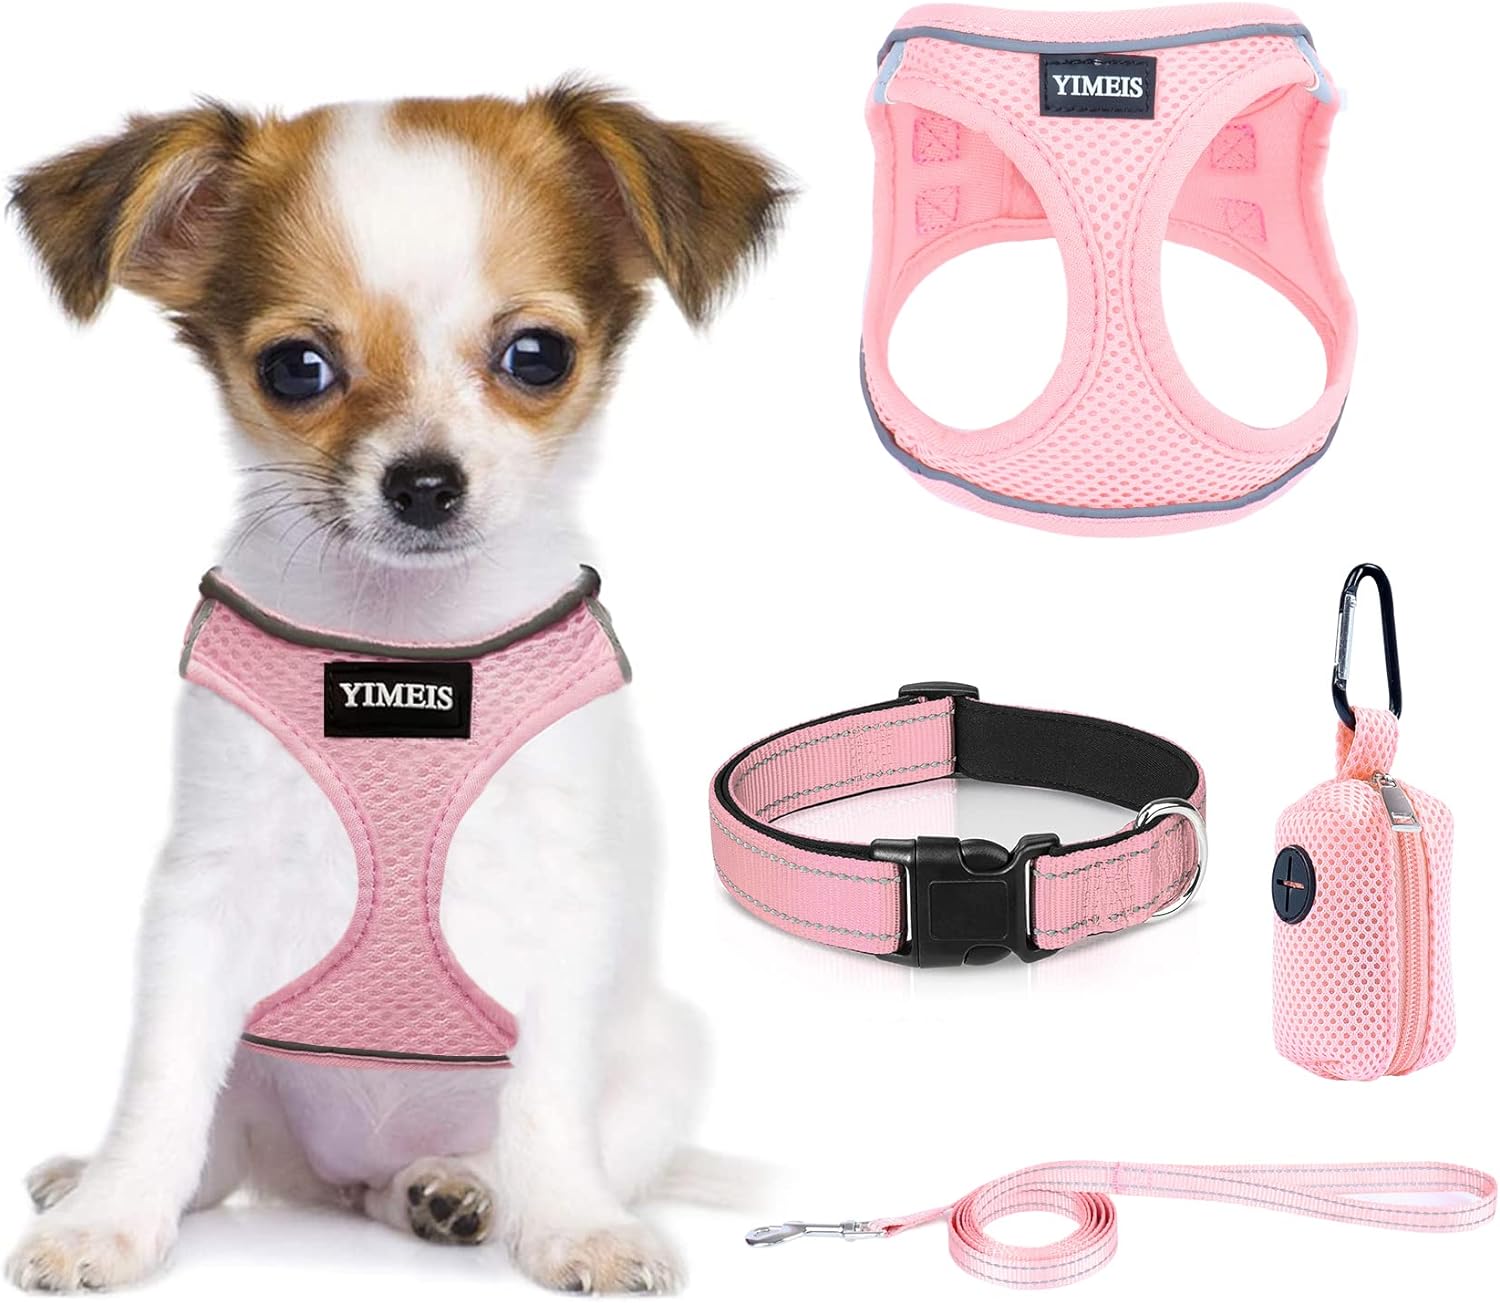 YIMEIS Dog Harness and Leash Set, No Pull Soft Mesh Pet Harness, Reflective Adjustable Puppy Vest for Small Medium Large Dogs, Cats (Pink-Update, Medium (Pack of 1)